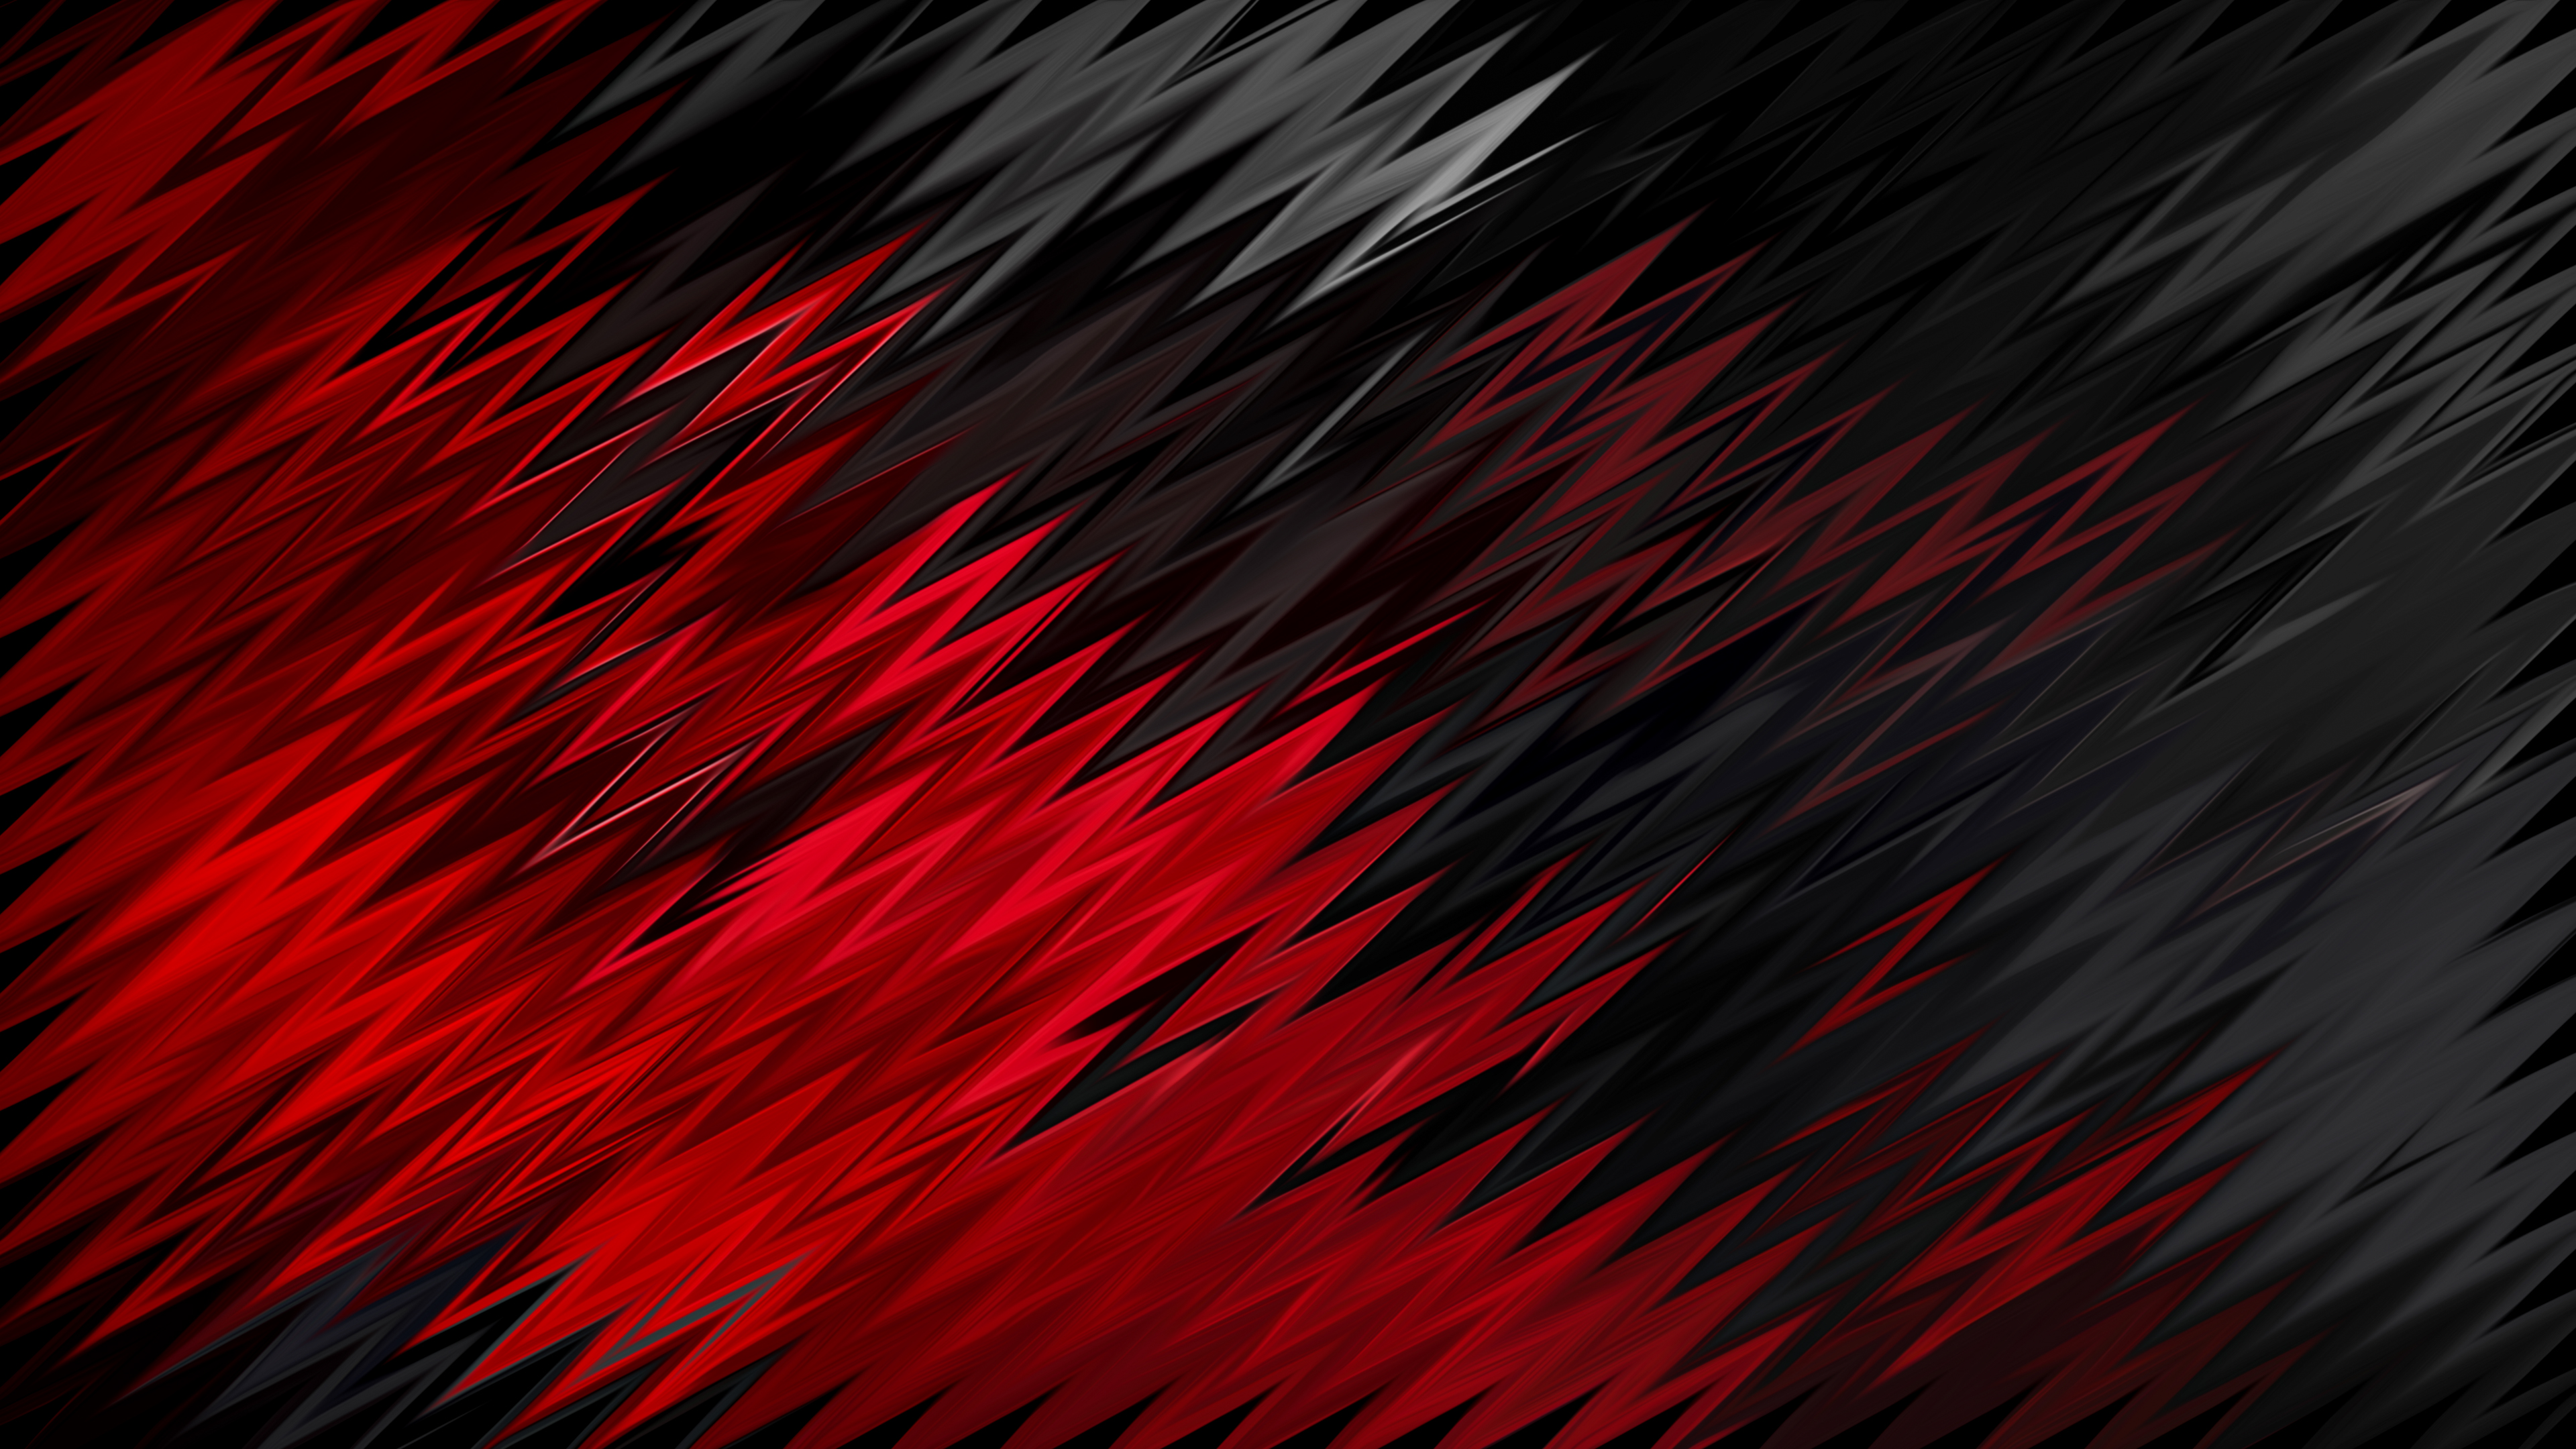 Red And Black Hd Backgrounds